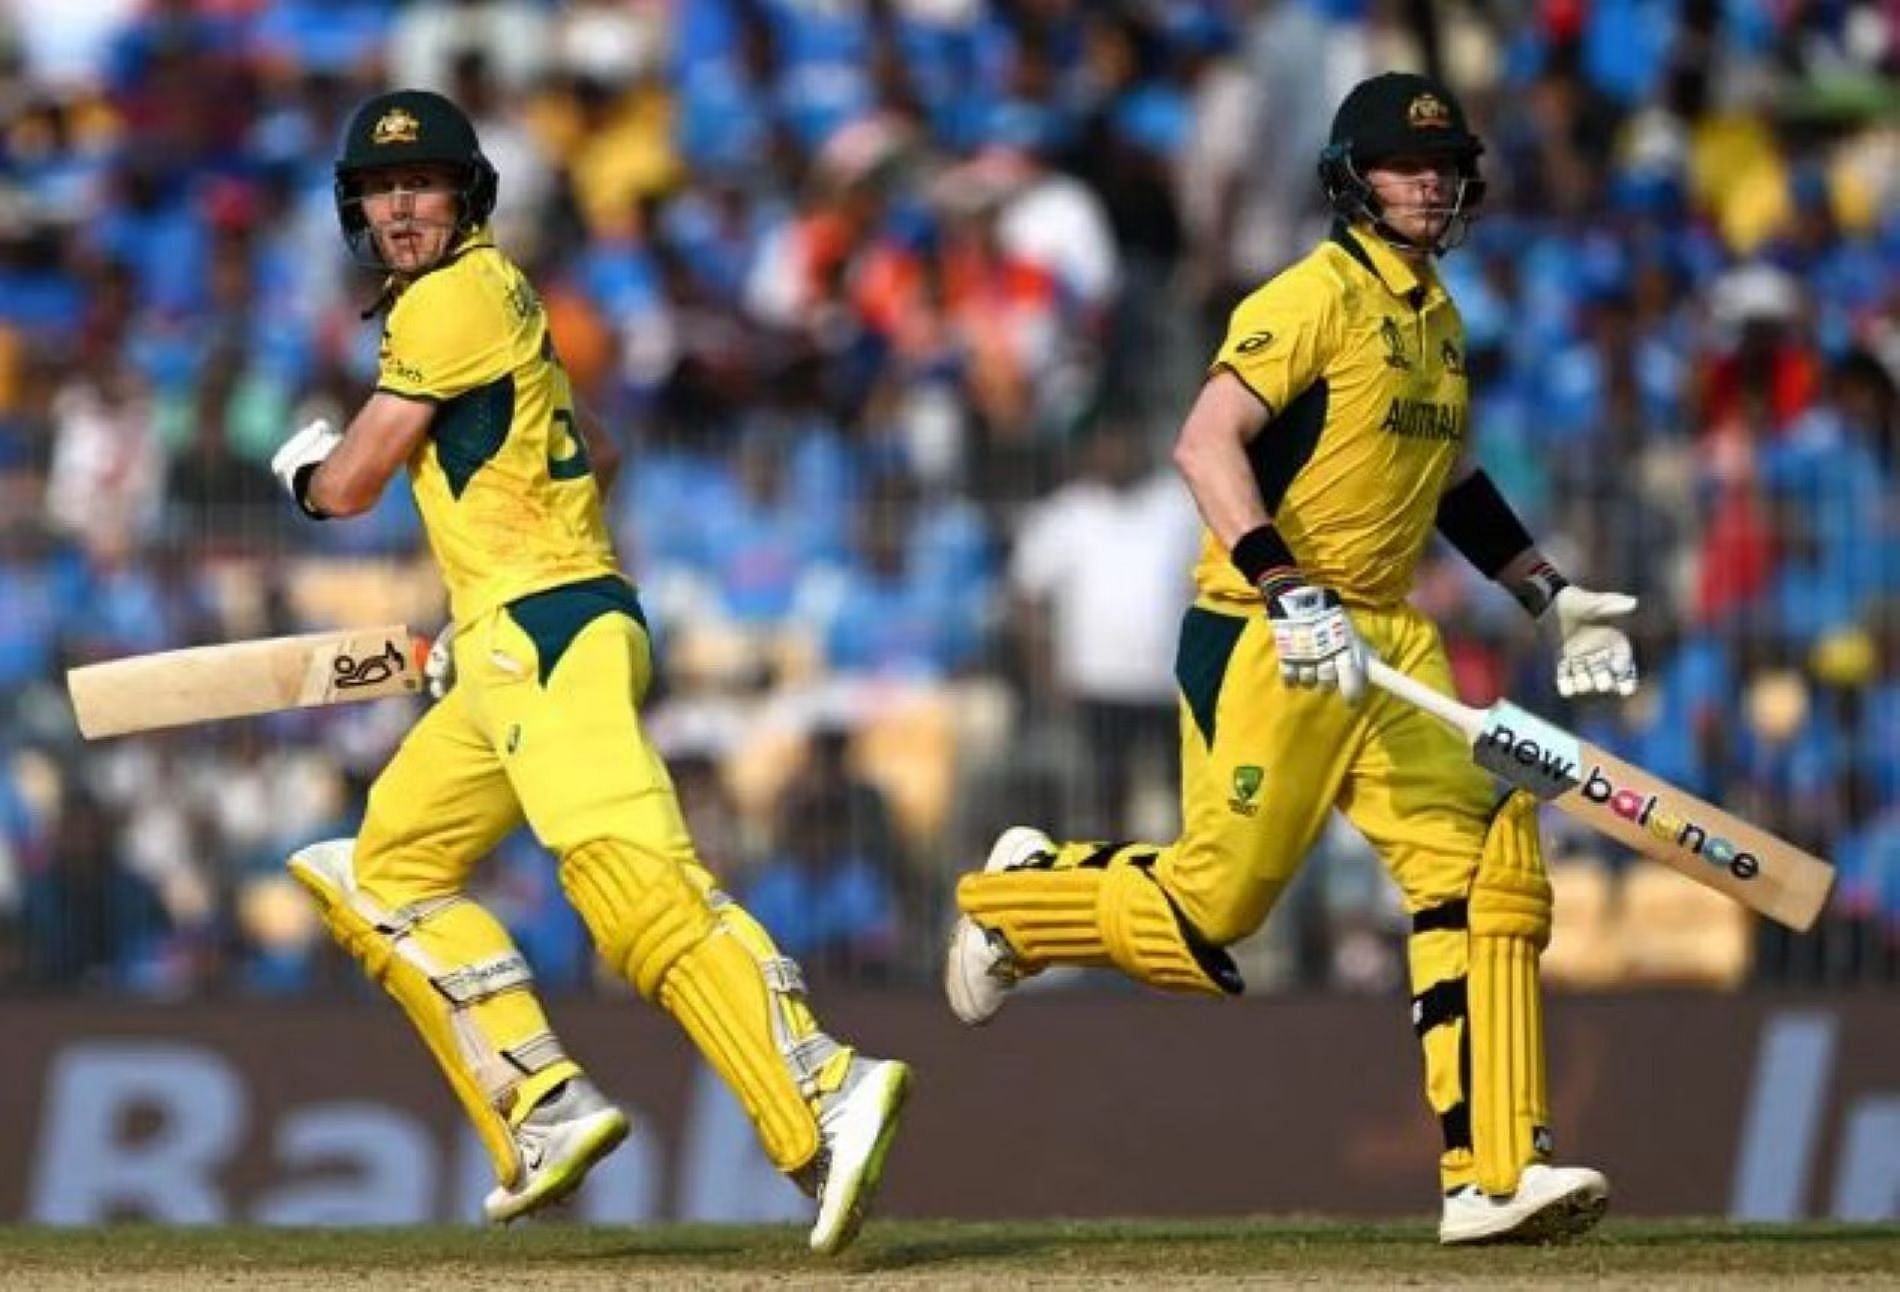 Marnus Labuschagne and Steve Smith have strike rates of 75.62 and 81.86 respectively in the 2023 World Cup.